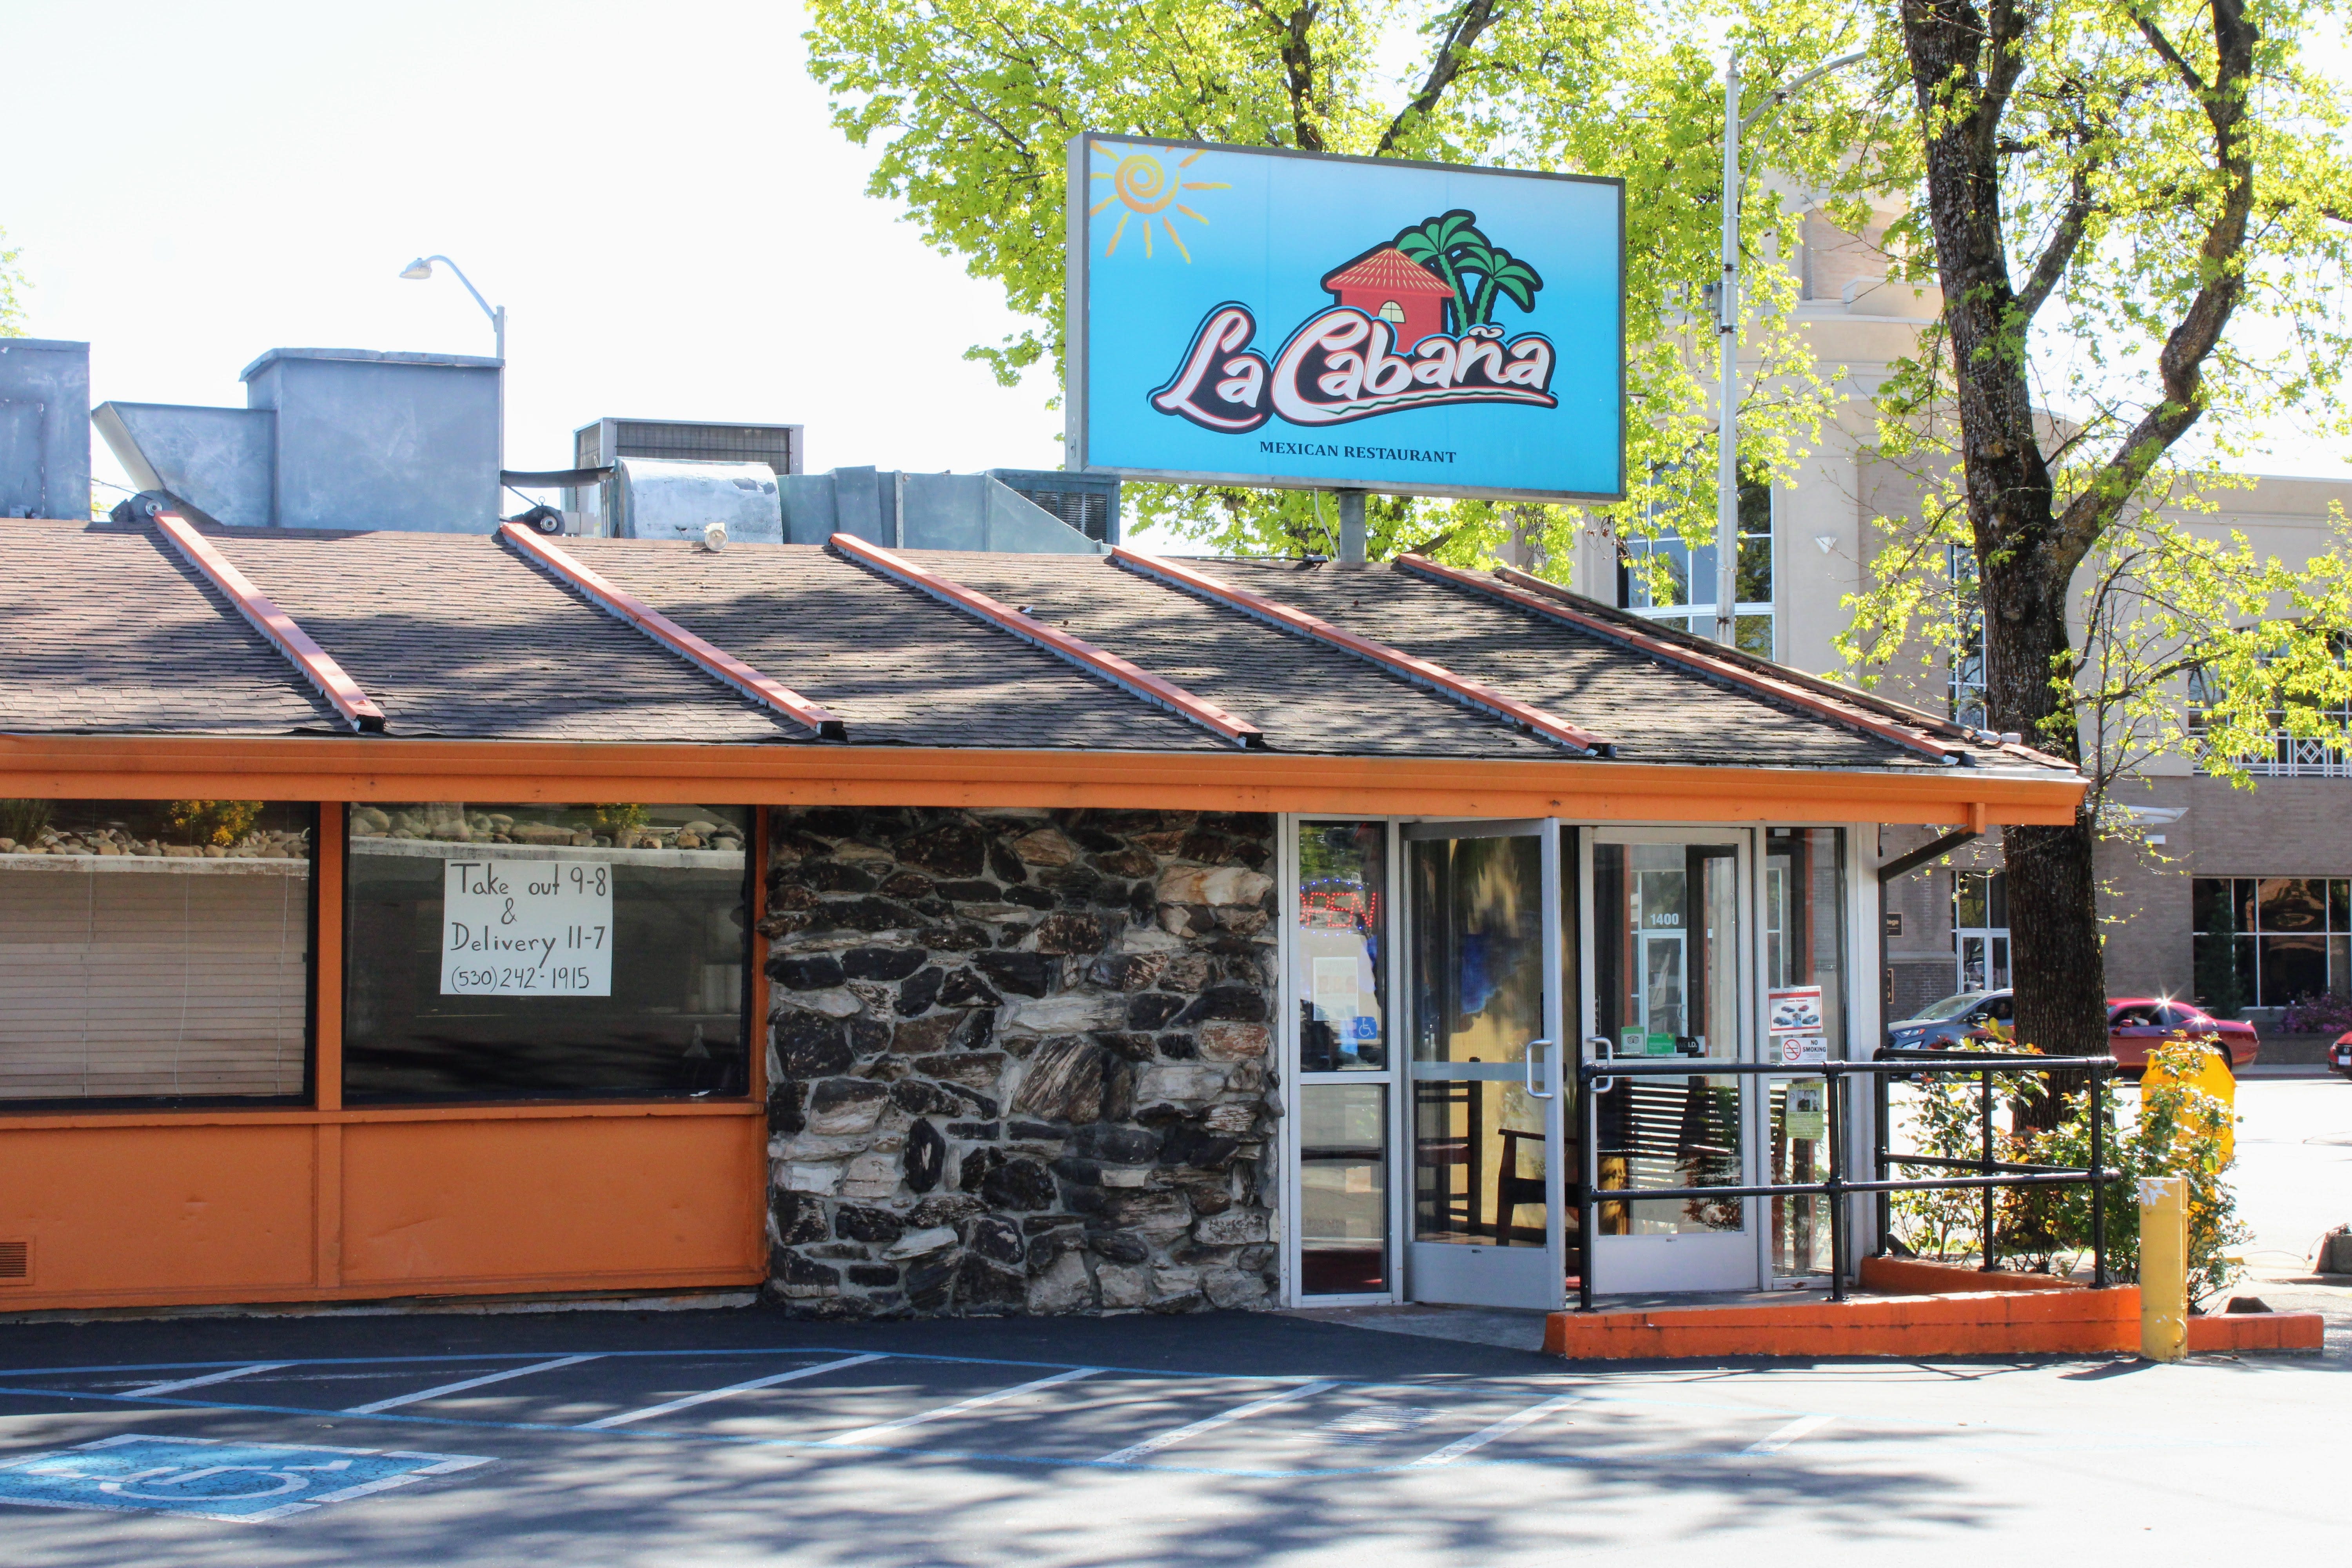 La Cabaña Mexican Restaurant, after 28 years in Redding, thanks diners in farewell post